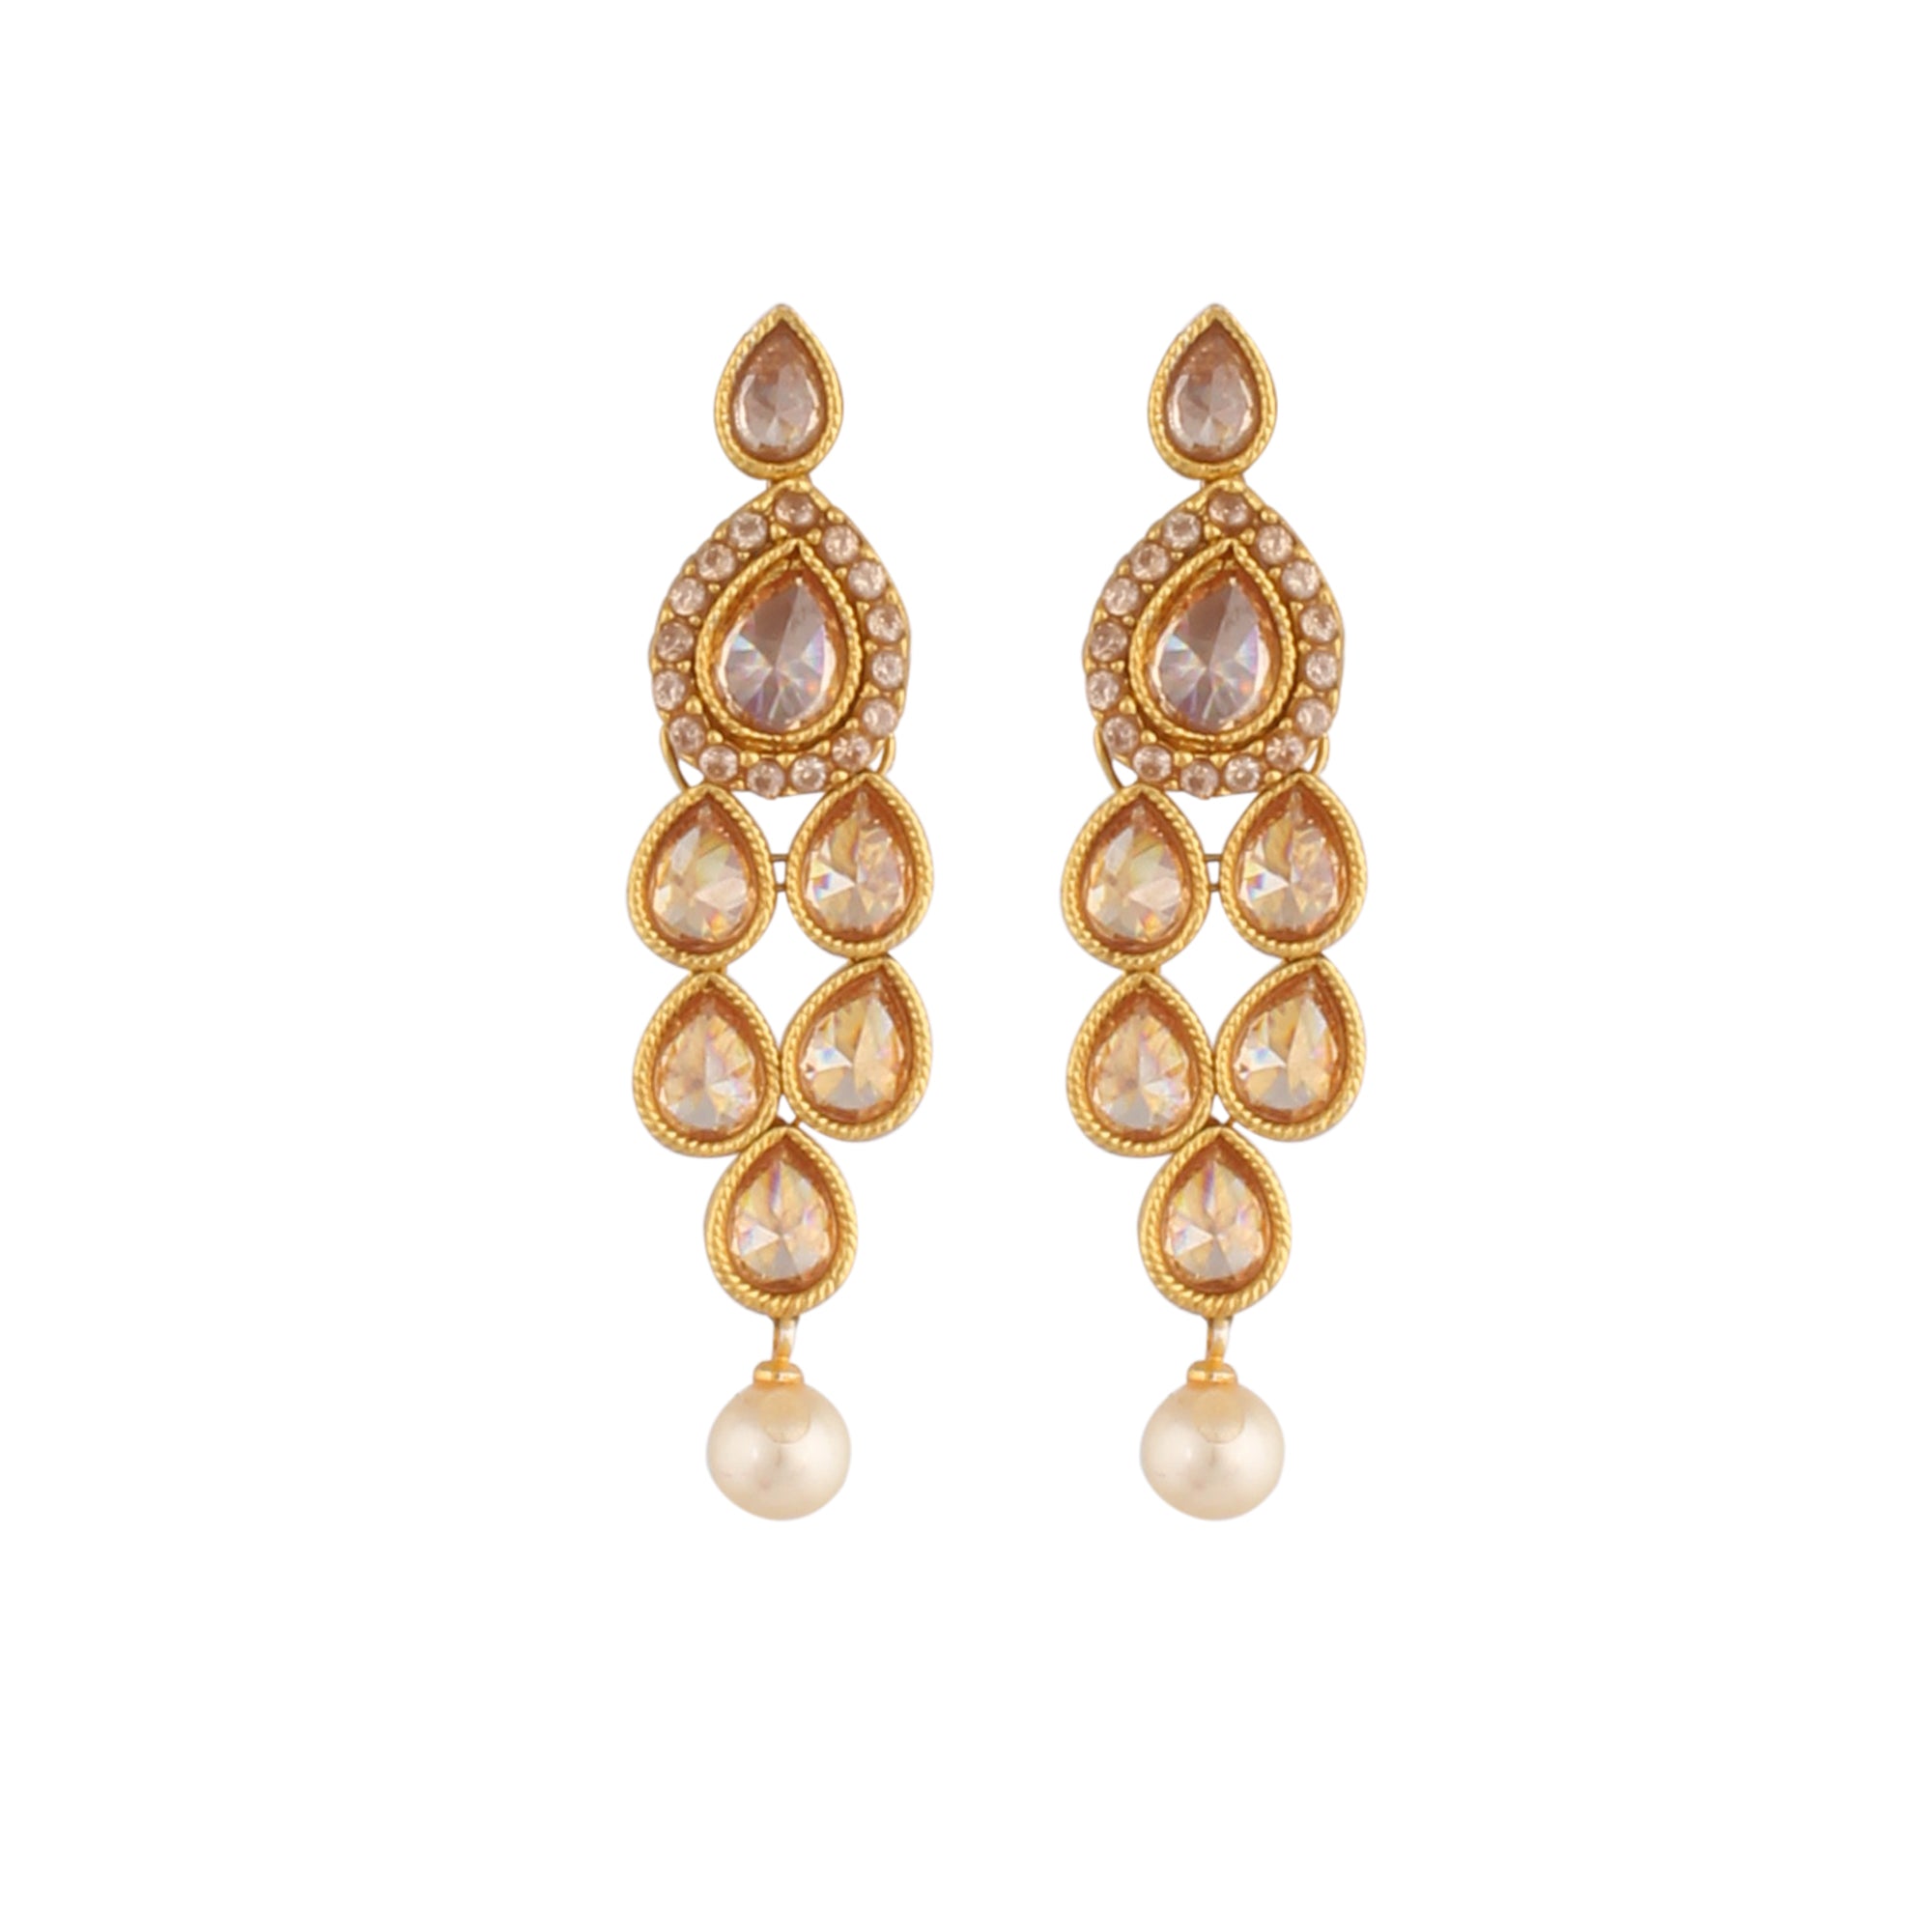 Indian Jewellery from Meira Jewellery:Necklace,KUNDAN NECKLACE SET WITH PEARL MULTISTRAND & MATCHING EARRING FOR WOMEN